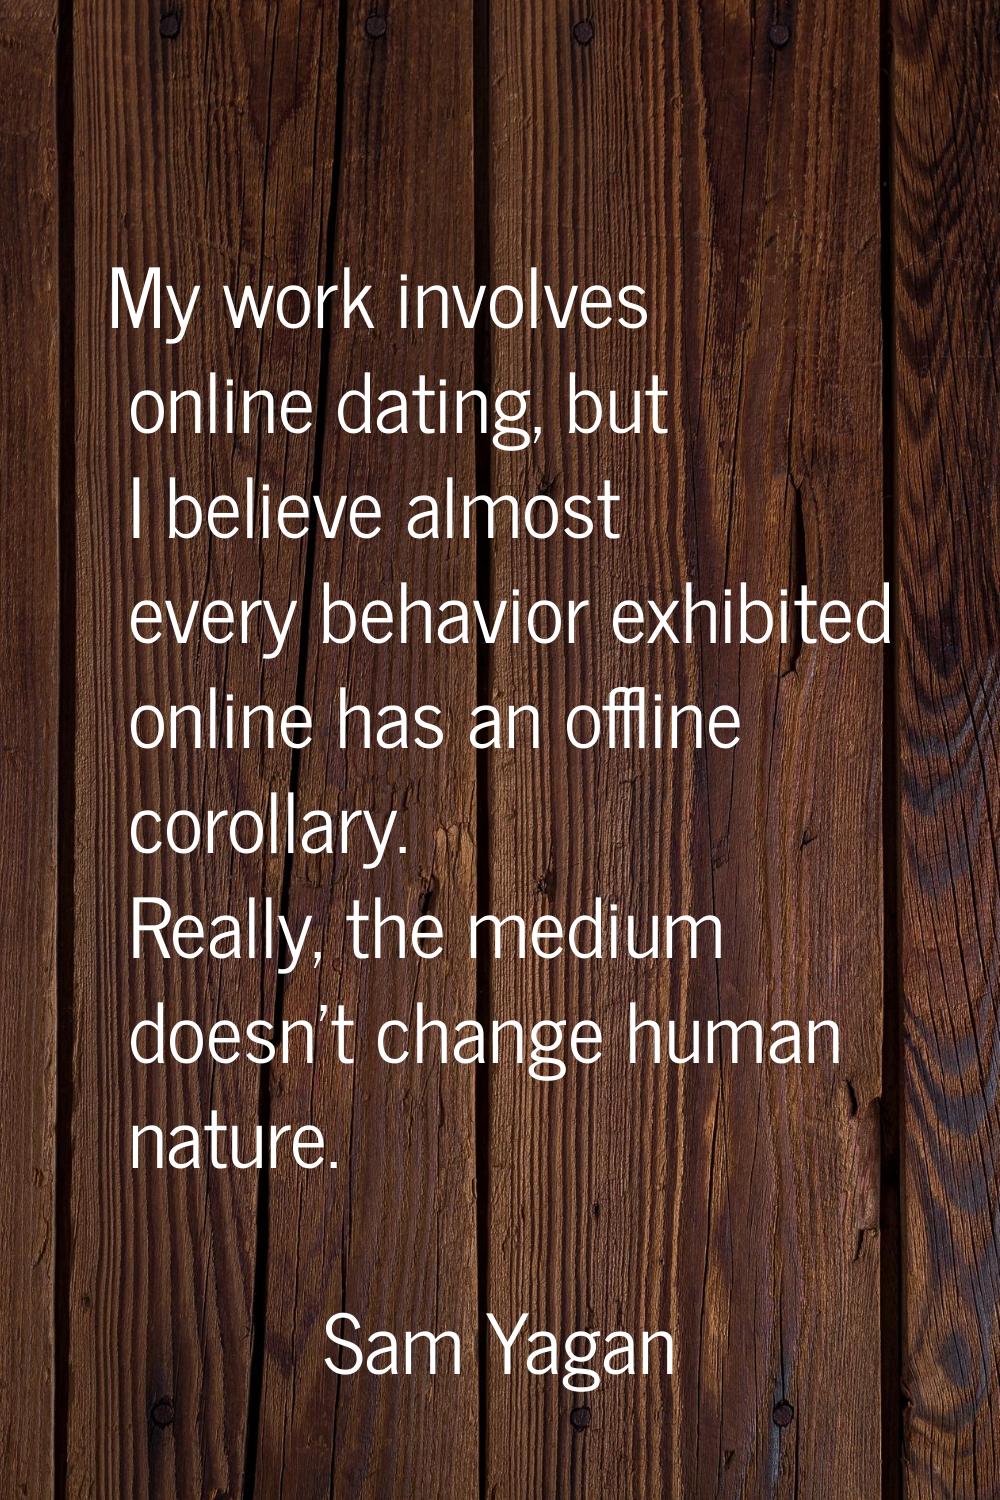 My work involves online dating, but I believe almost every behavior exhibited online has an offline